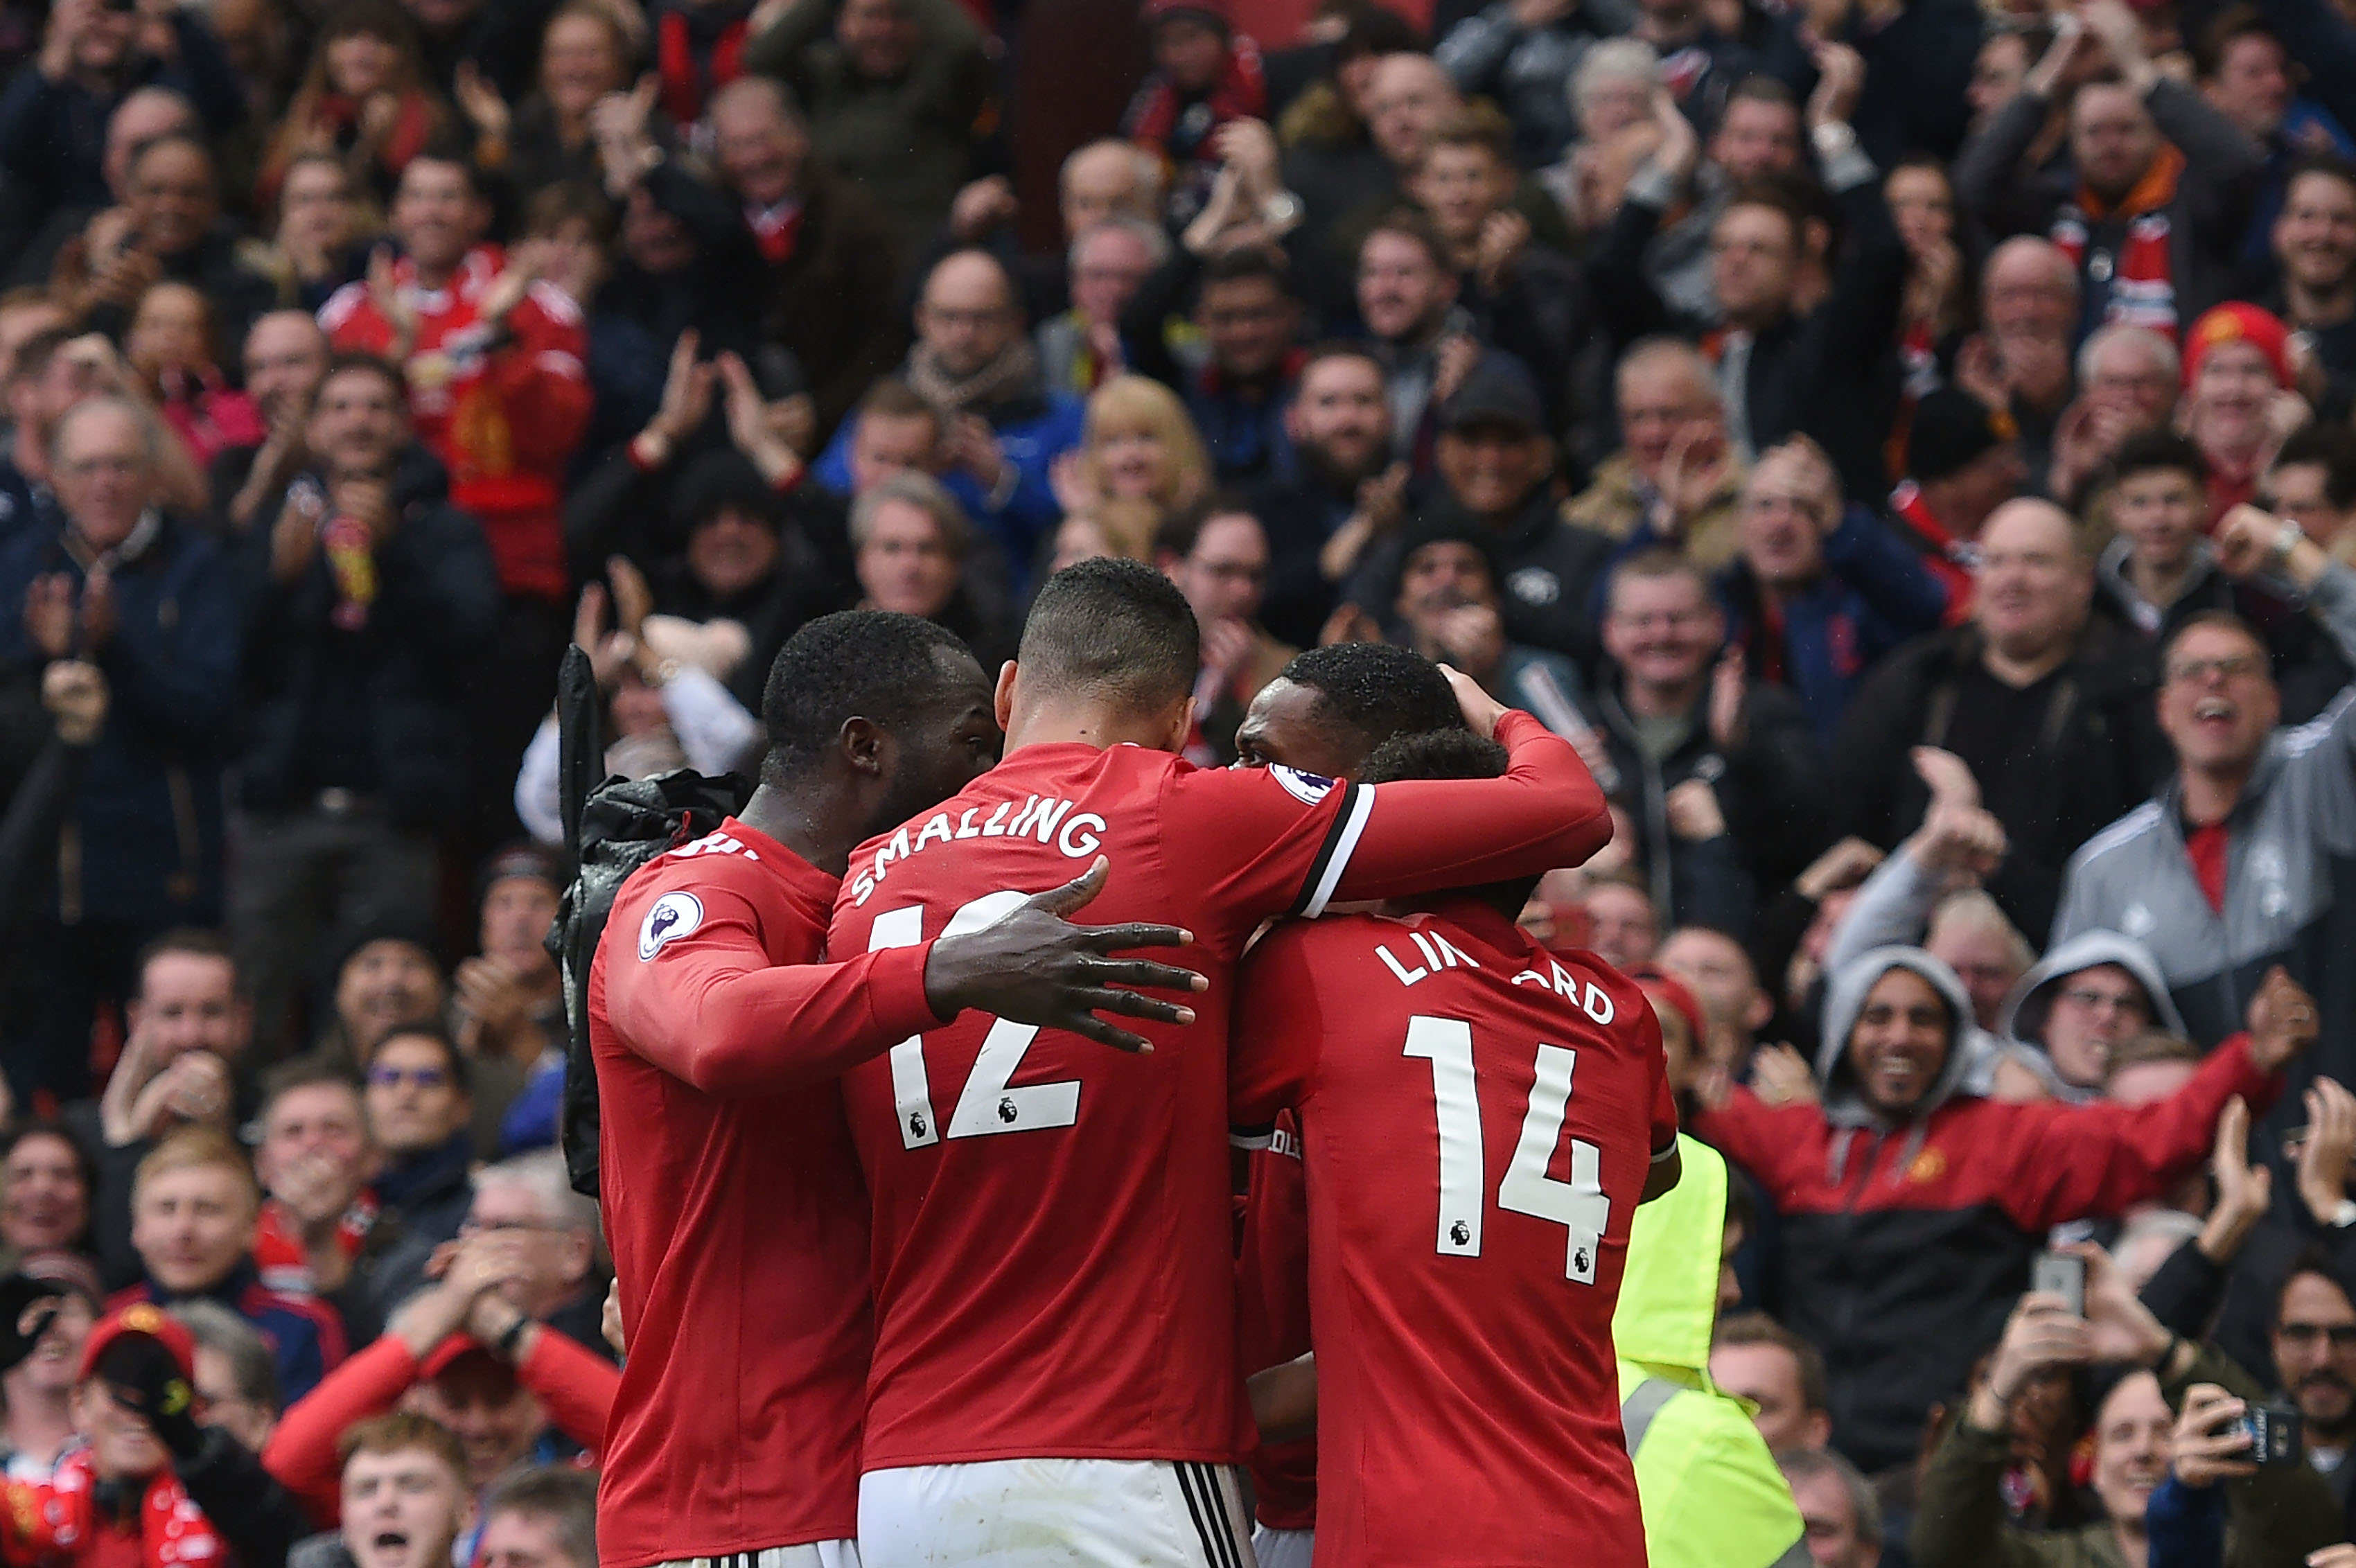 Manchester United's French striker Anthony Martial (2nd R) celebrates with teammates after scoring the opening goal of the English Premier League football match between Manchester United and Tottenham Hotspur at Old Trafford in Manchester, north west England, on October 28, 2017.
Manchester United won the game 1-0. / AFP PHOTO / Oli SCARFF / RESTRICTED TO EDITORIAL USE. No use with unauthorized audio, video, data, fixture lists, club/league logos or 'live' services. Online in-match use limited to 75 images, no video emulation. No use in betting, games or single club/league/player publications.  /         (Photo credit should read OLI SCARFF/AFP/Getty Images)